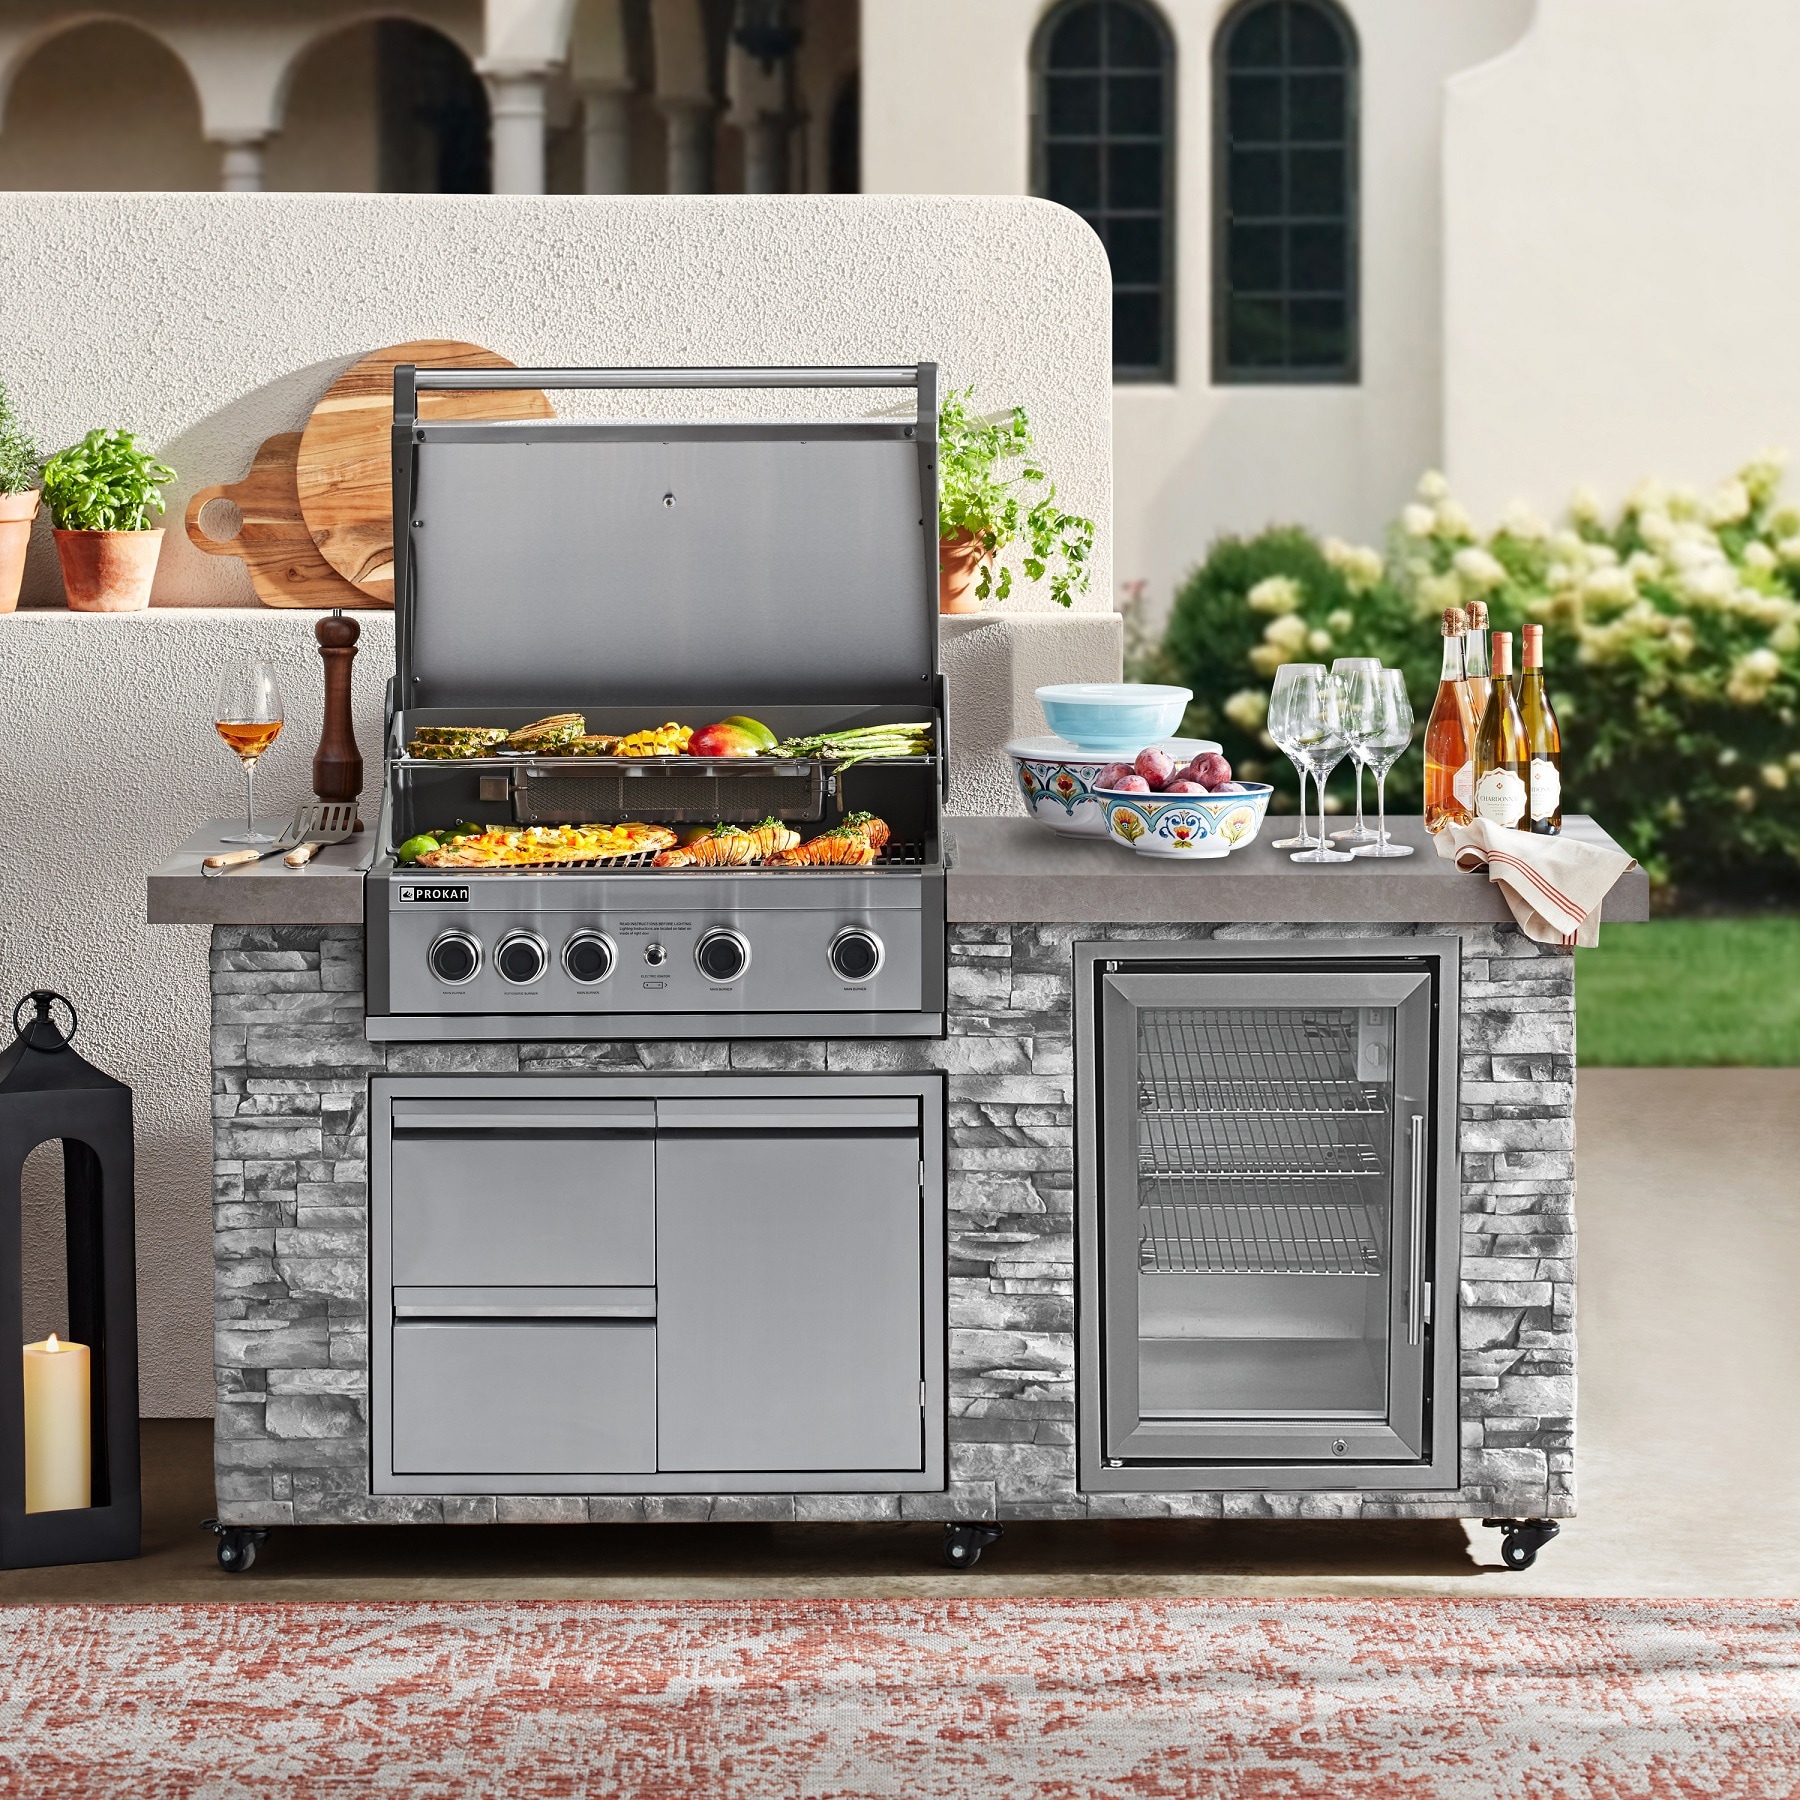 Prokan Grills Pro Elite 5B European Ledge Propane Grill Island 78.2-in W x  33.1-in D x 47.9-in H Outdoor Kitchen Gas Grill with 5 Burners in the  Modular Outdoor Kitchens department at